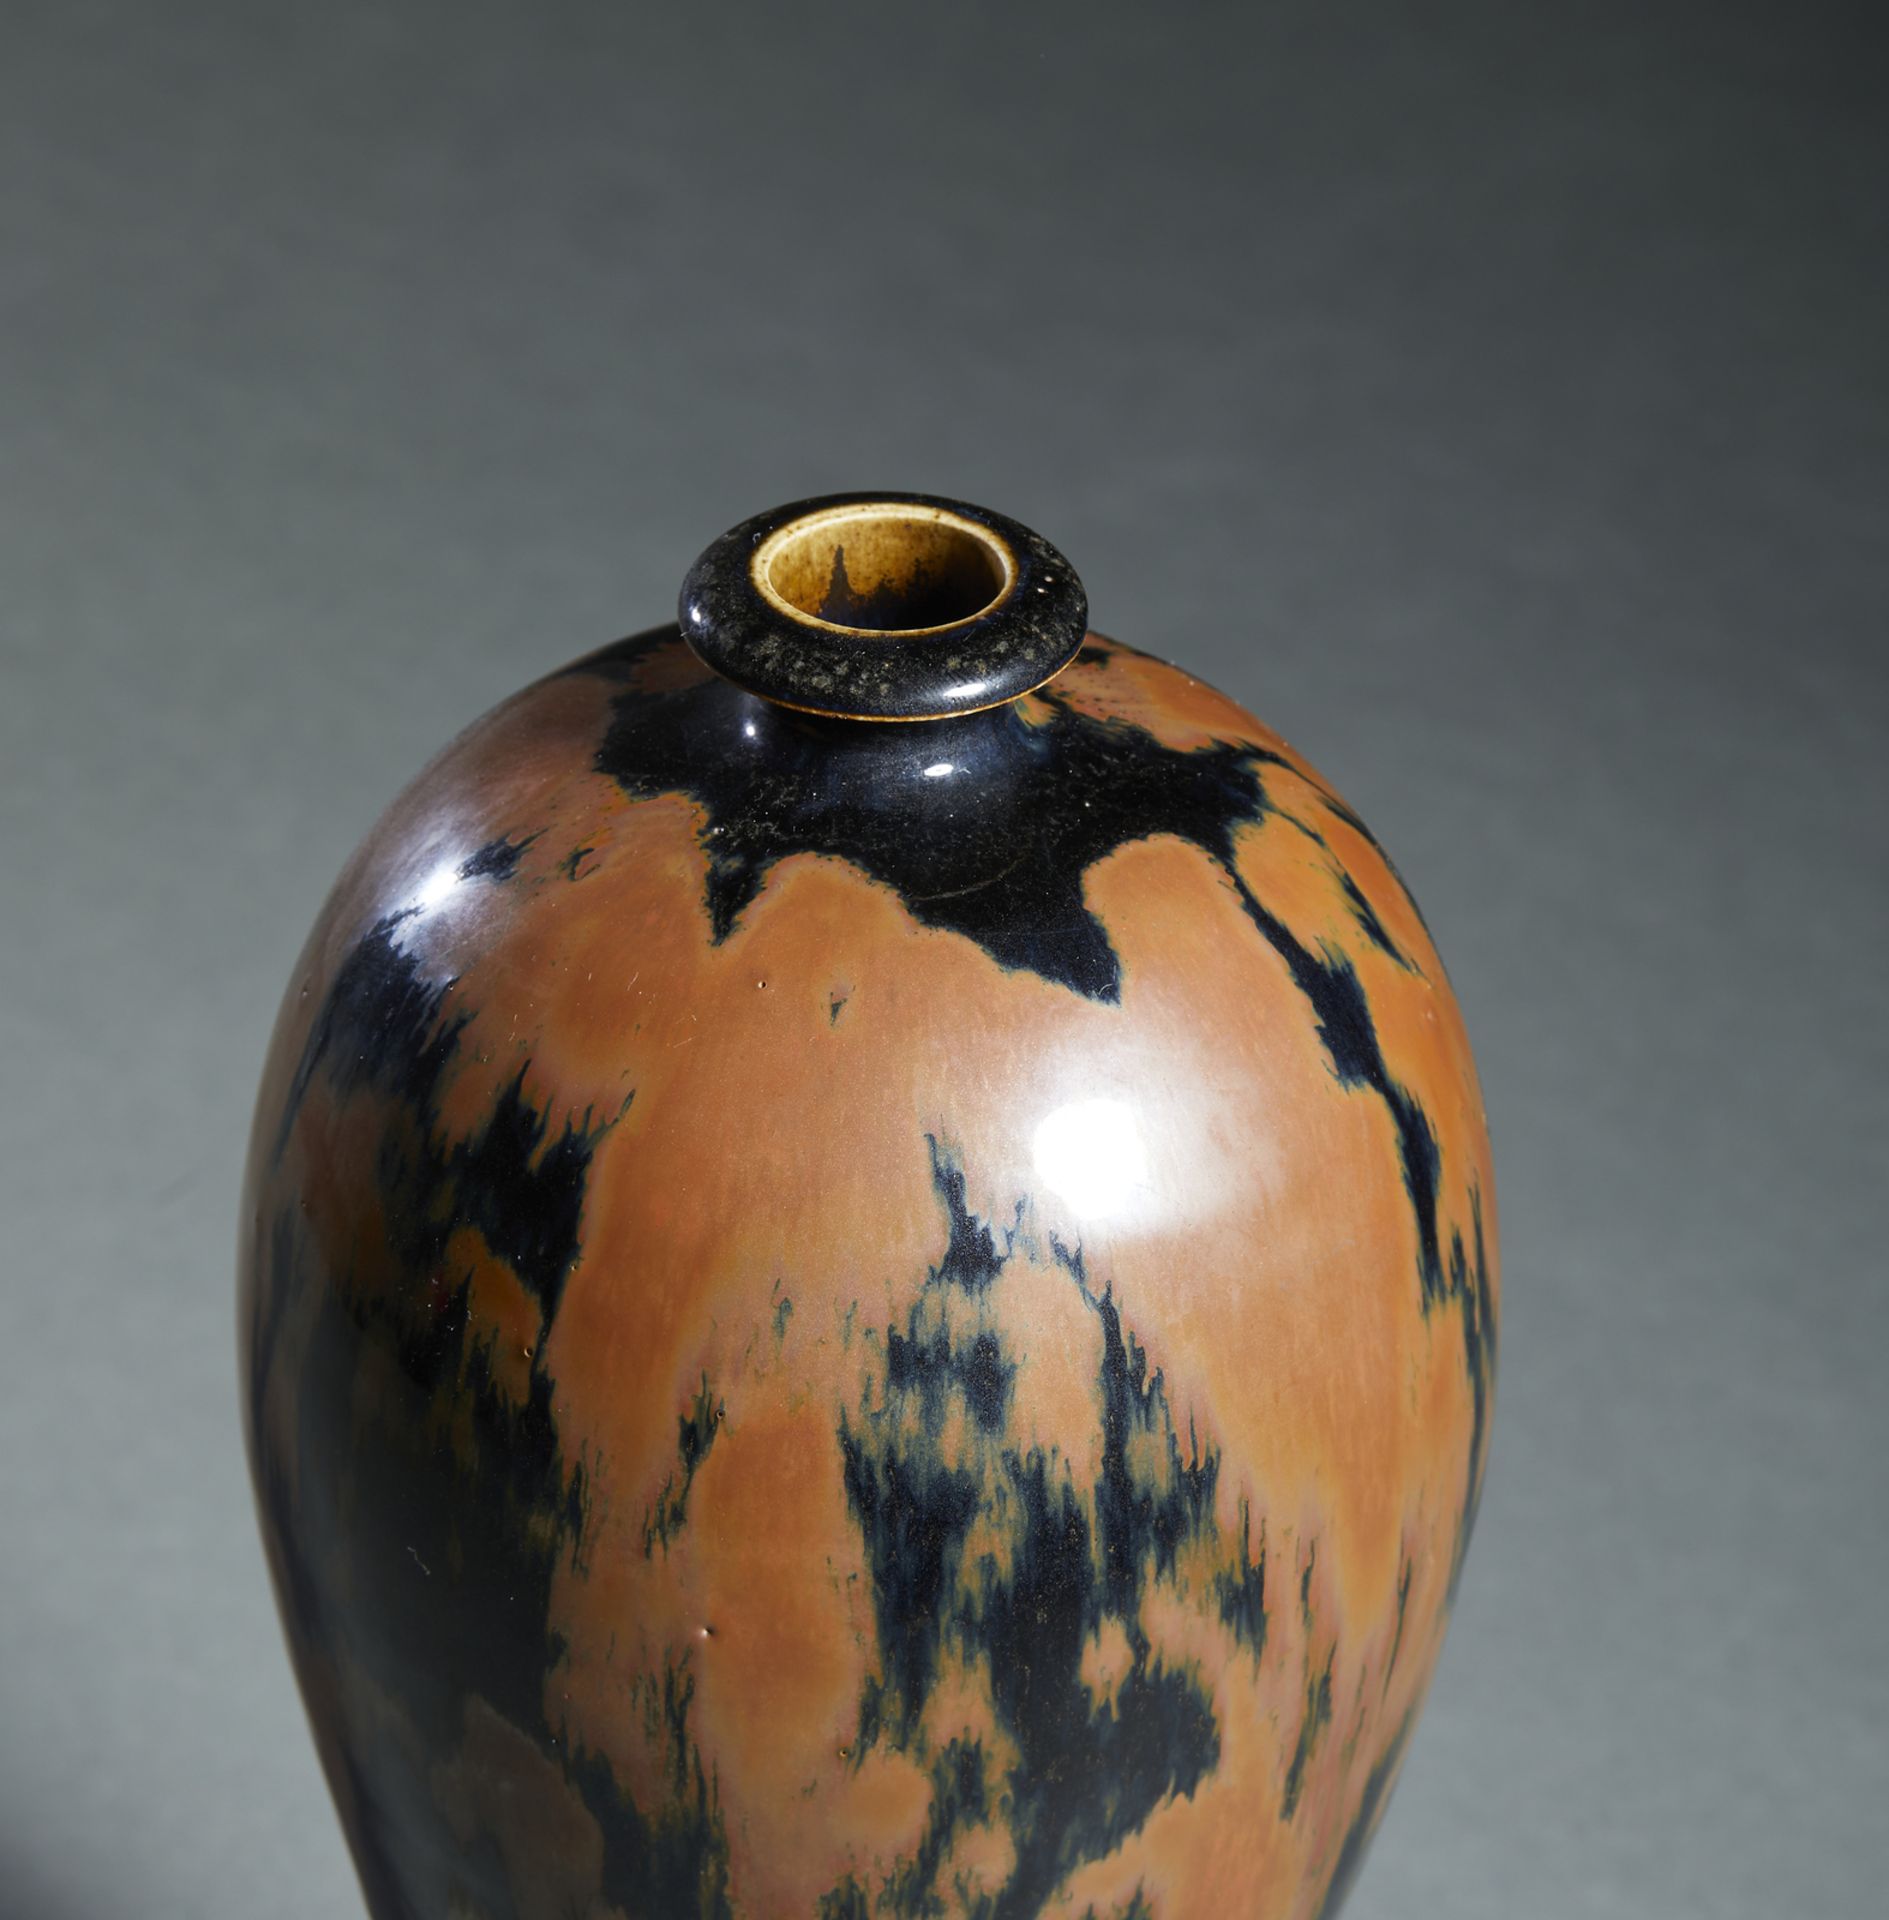 Meiping pottery vase in the Jian Song style China, 19th century with its characteristic inverted - Bild 2 aus 2